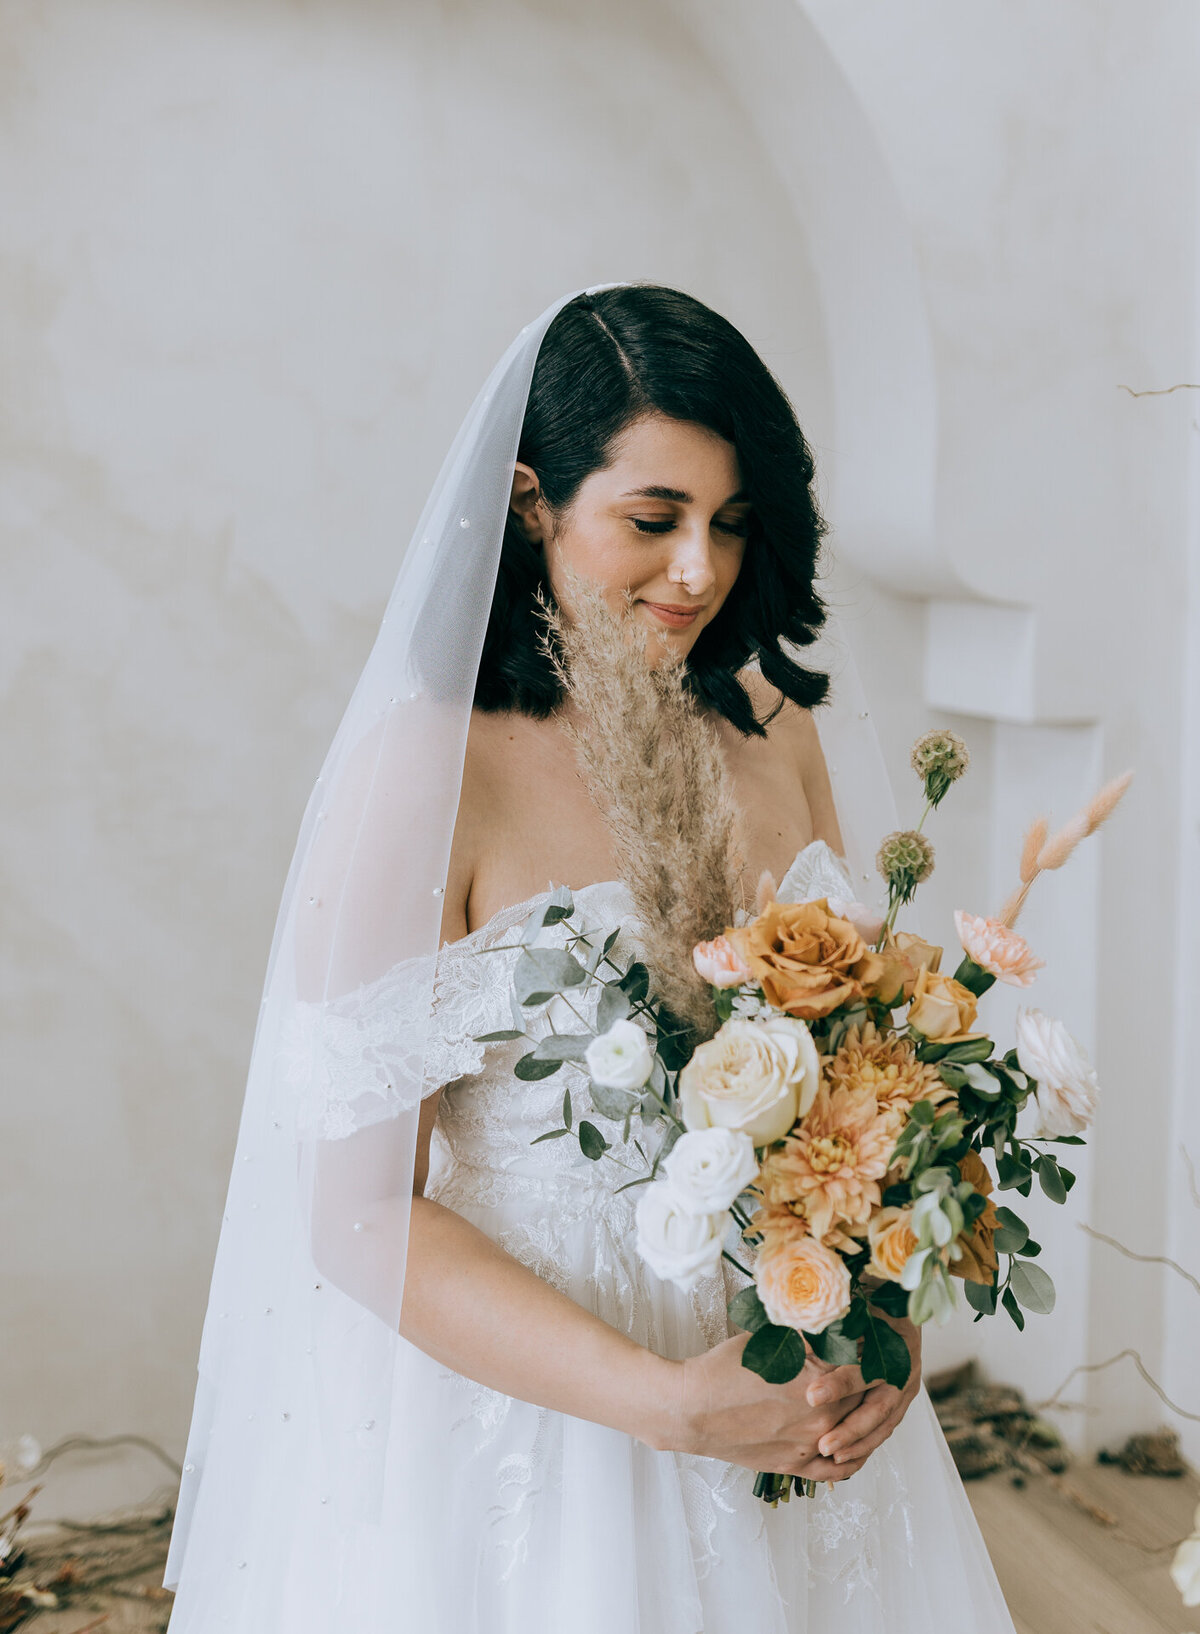 Bride in a white dress holding a bouquet of flowers.